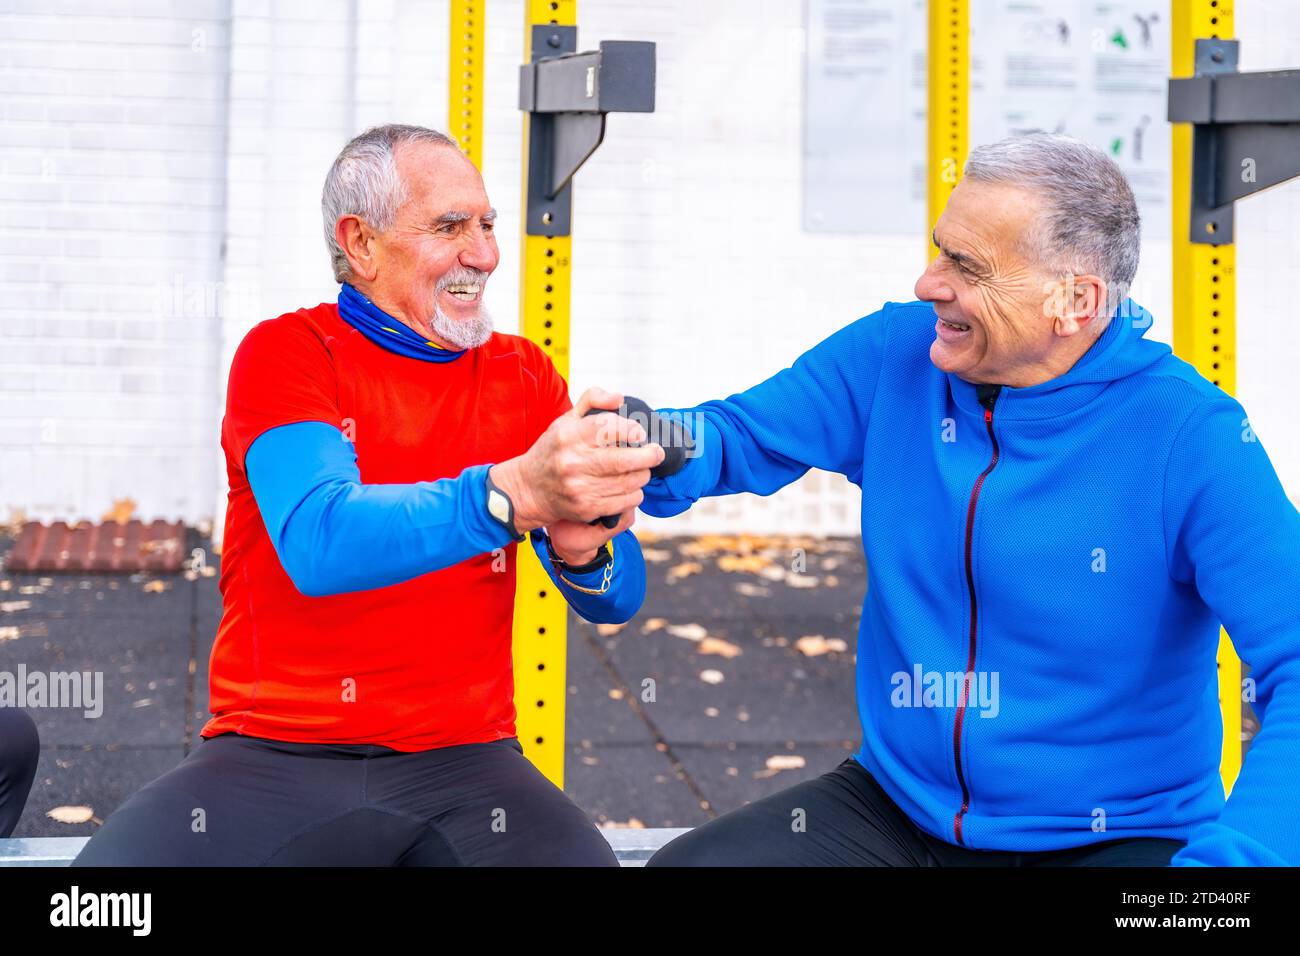 Senior men having fun together in a sports ground congratulating themselves Stock Photo